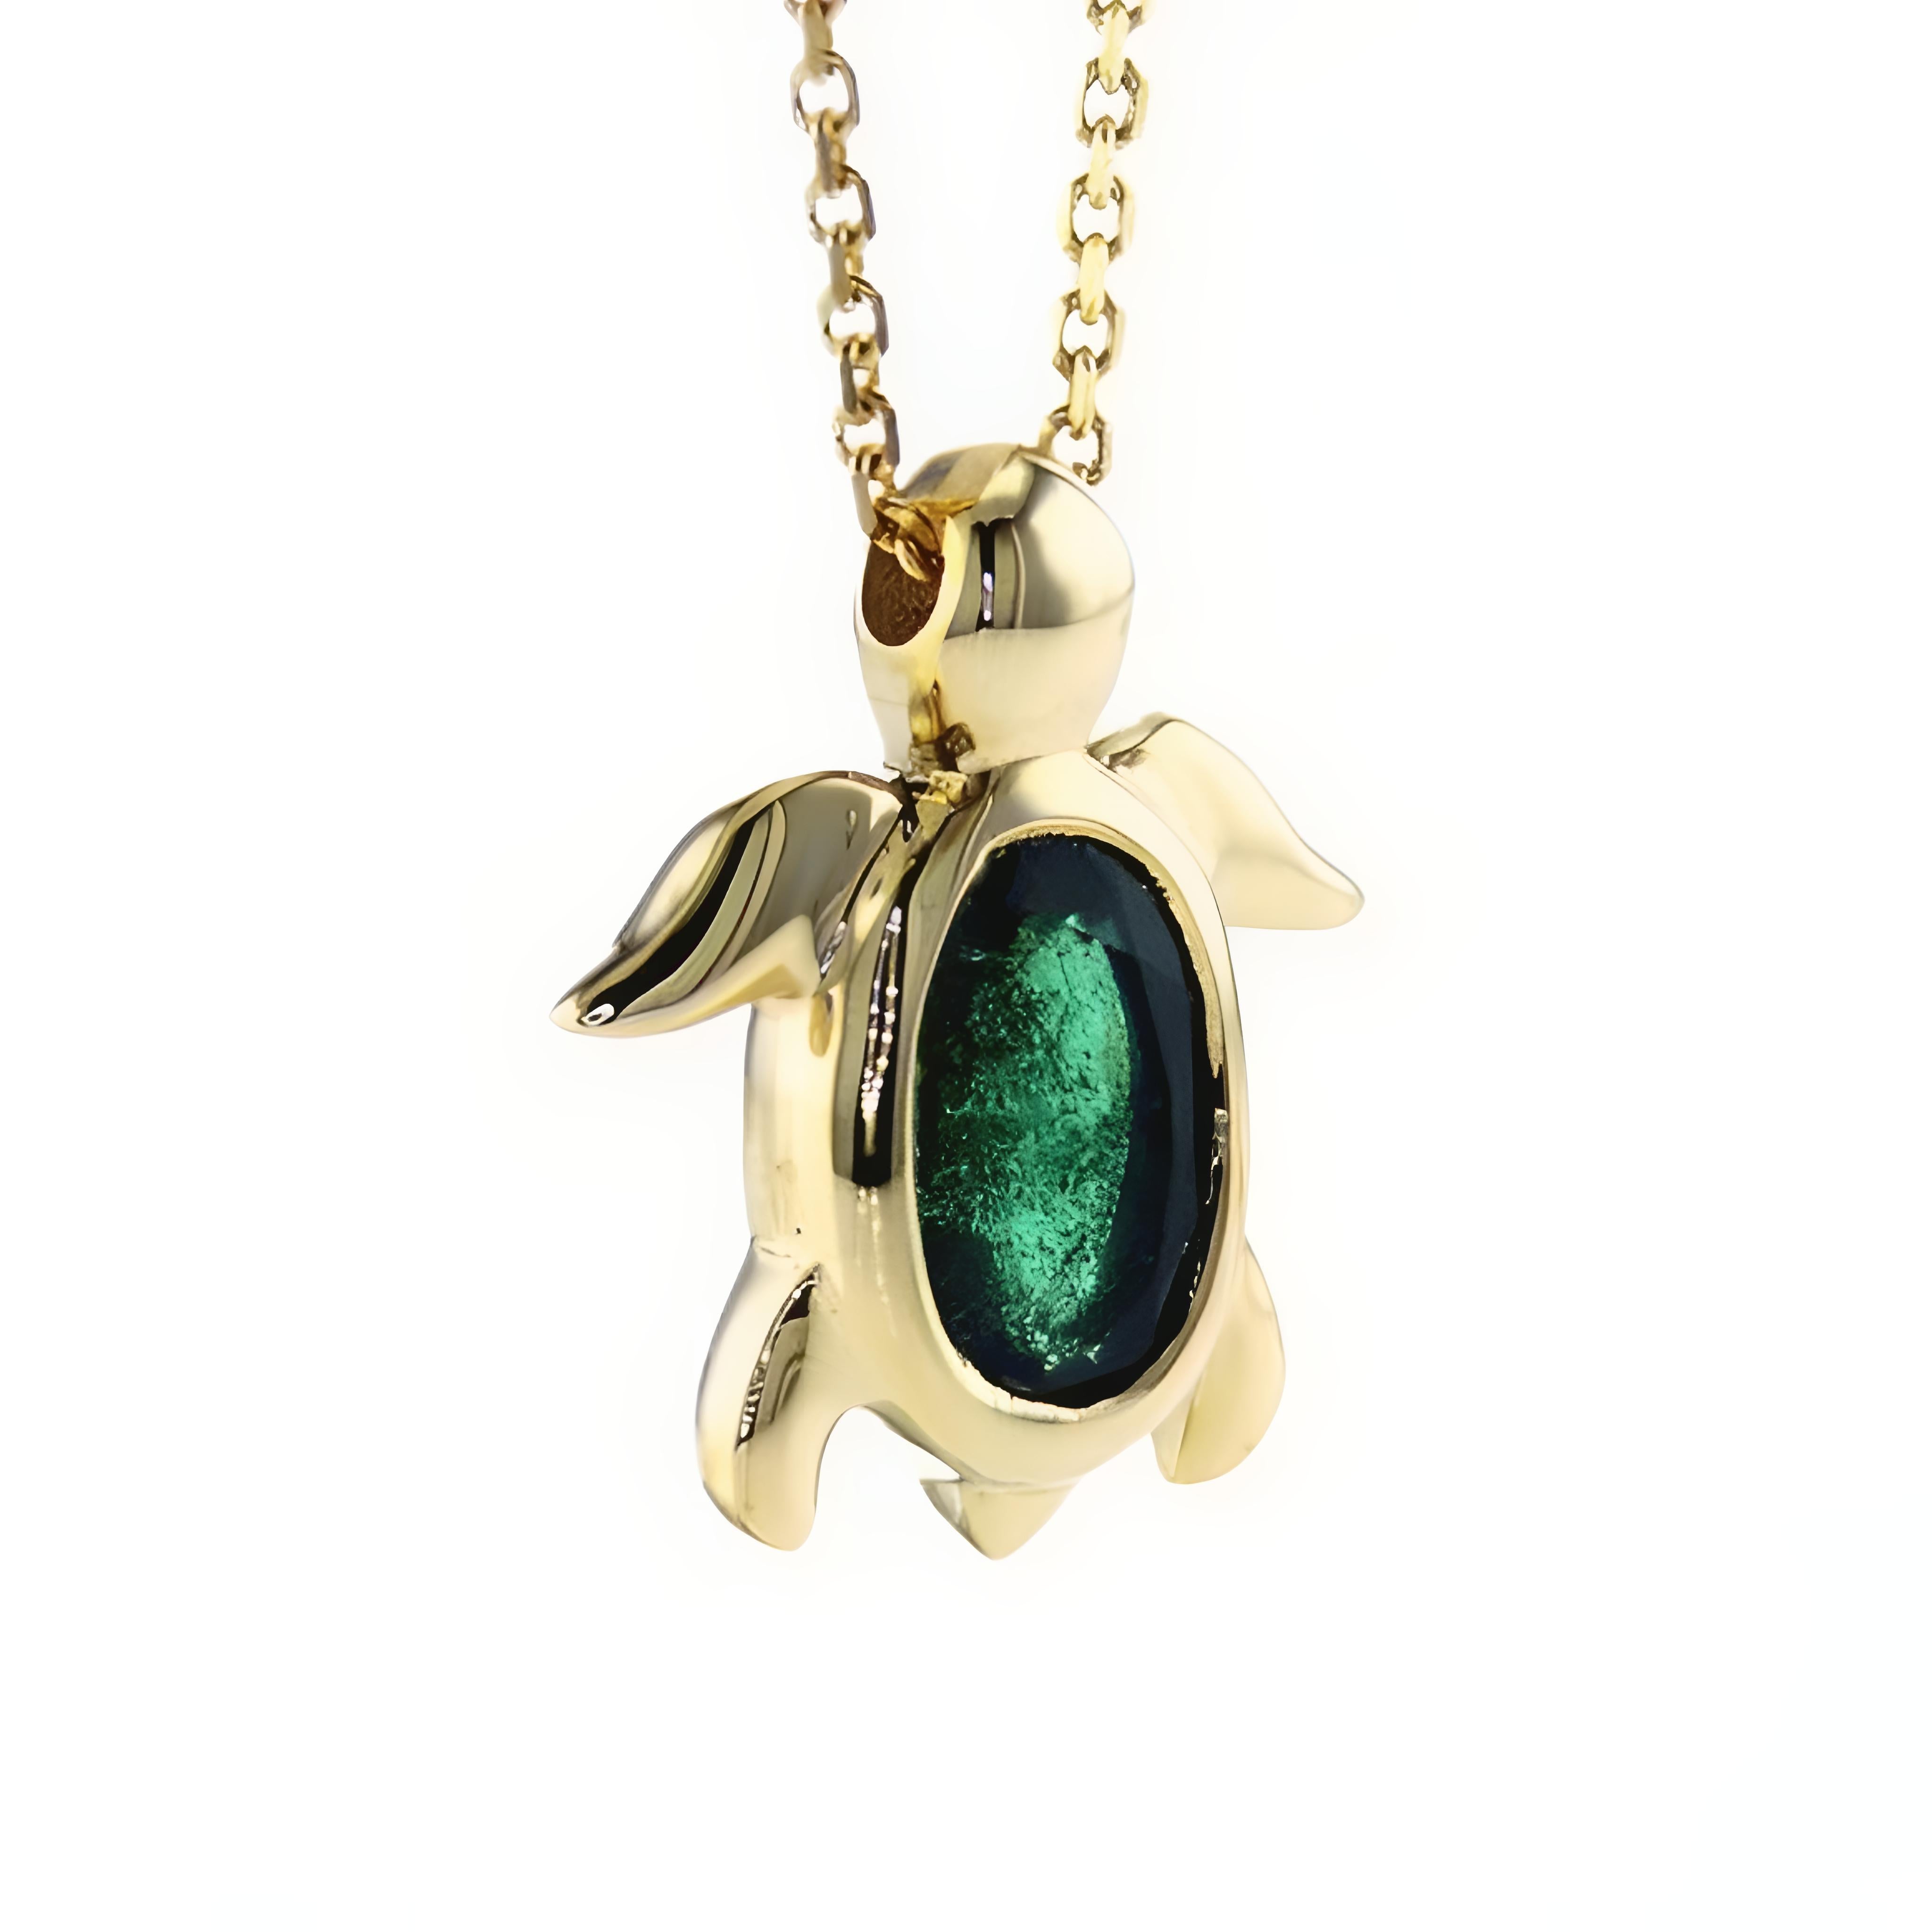 0.50Ct Oval Natural Emerald and 14K Yellow Gold Sea Turtle Pendant

Product Description:

Presenting our Emerald & Gold SeaTurtle Pendant, an artful creation that brings together the mystique of the sea and the elegance of fine jewelry. Featuring a